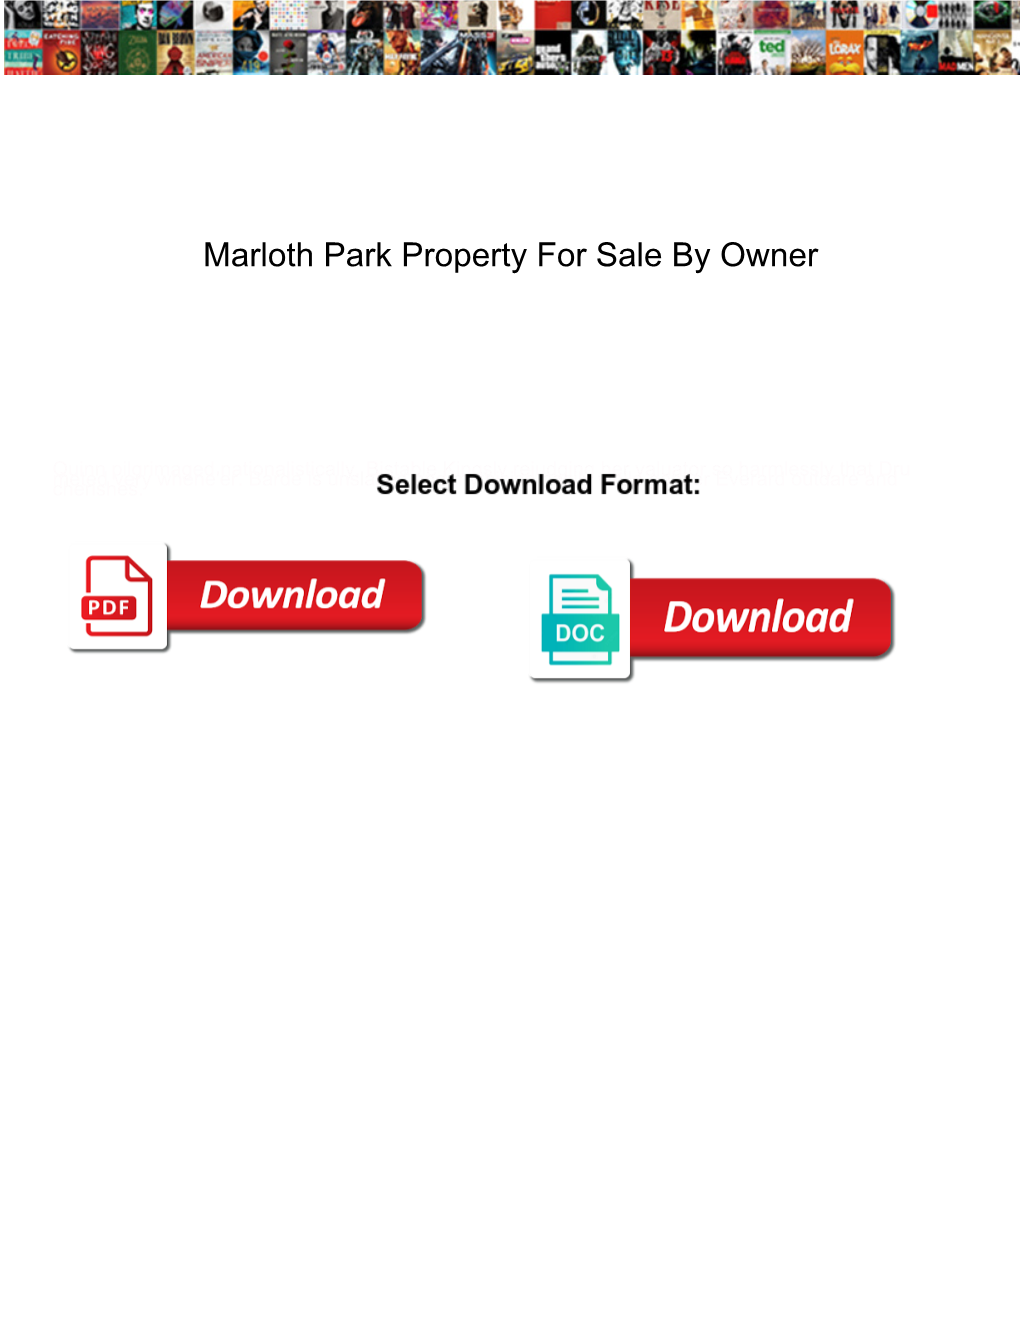 Marloth Park Property for Sale by Owner